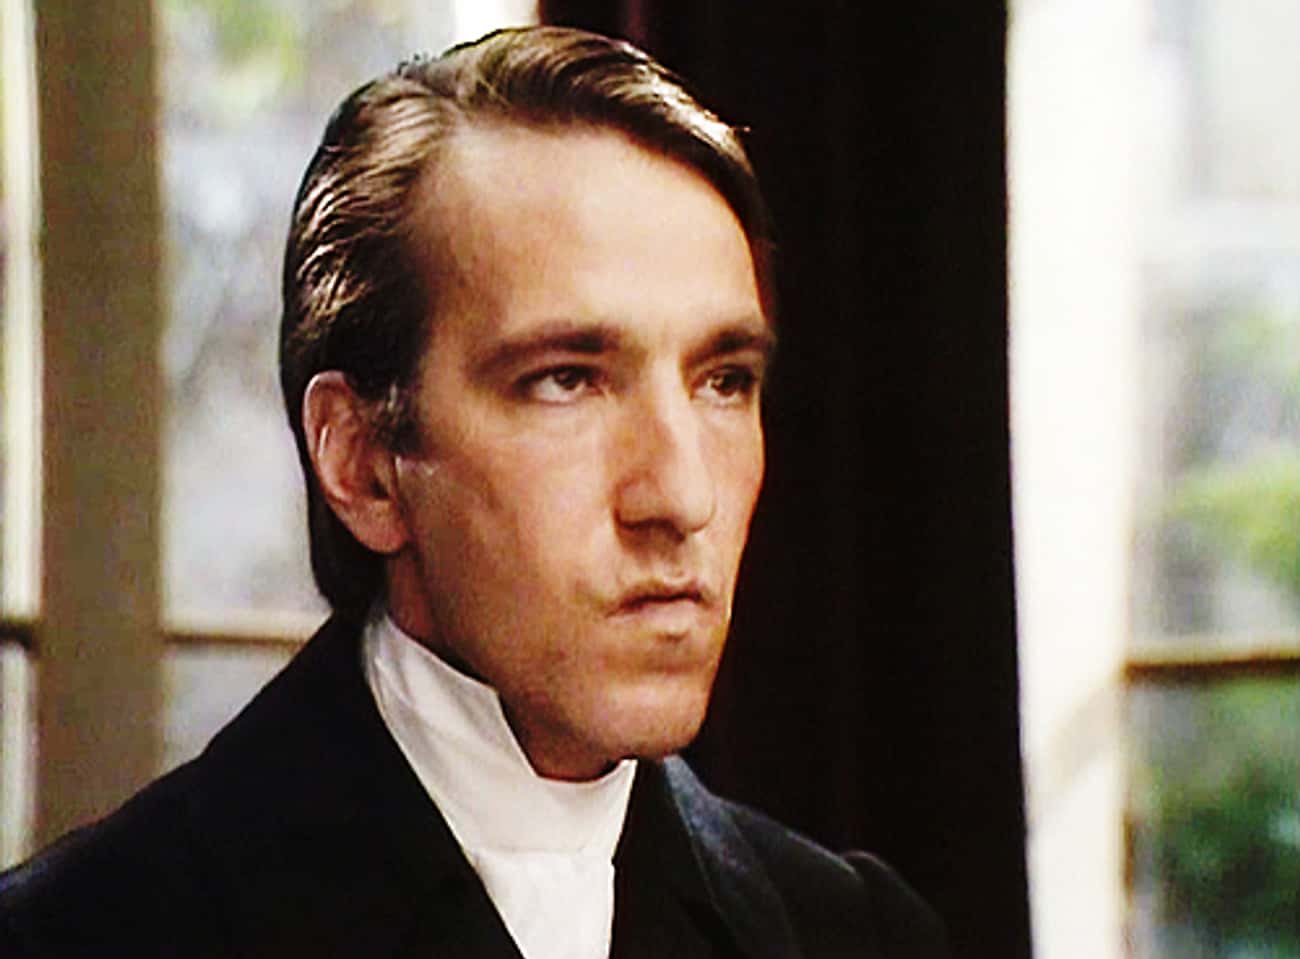 Young Alan Rickman in Black Coat with White Collar